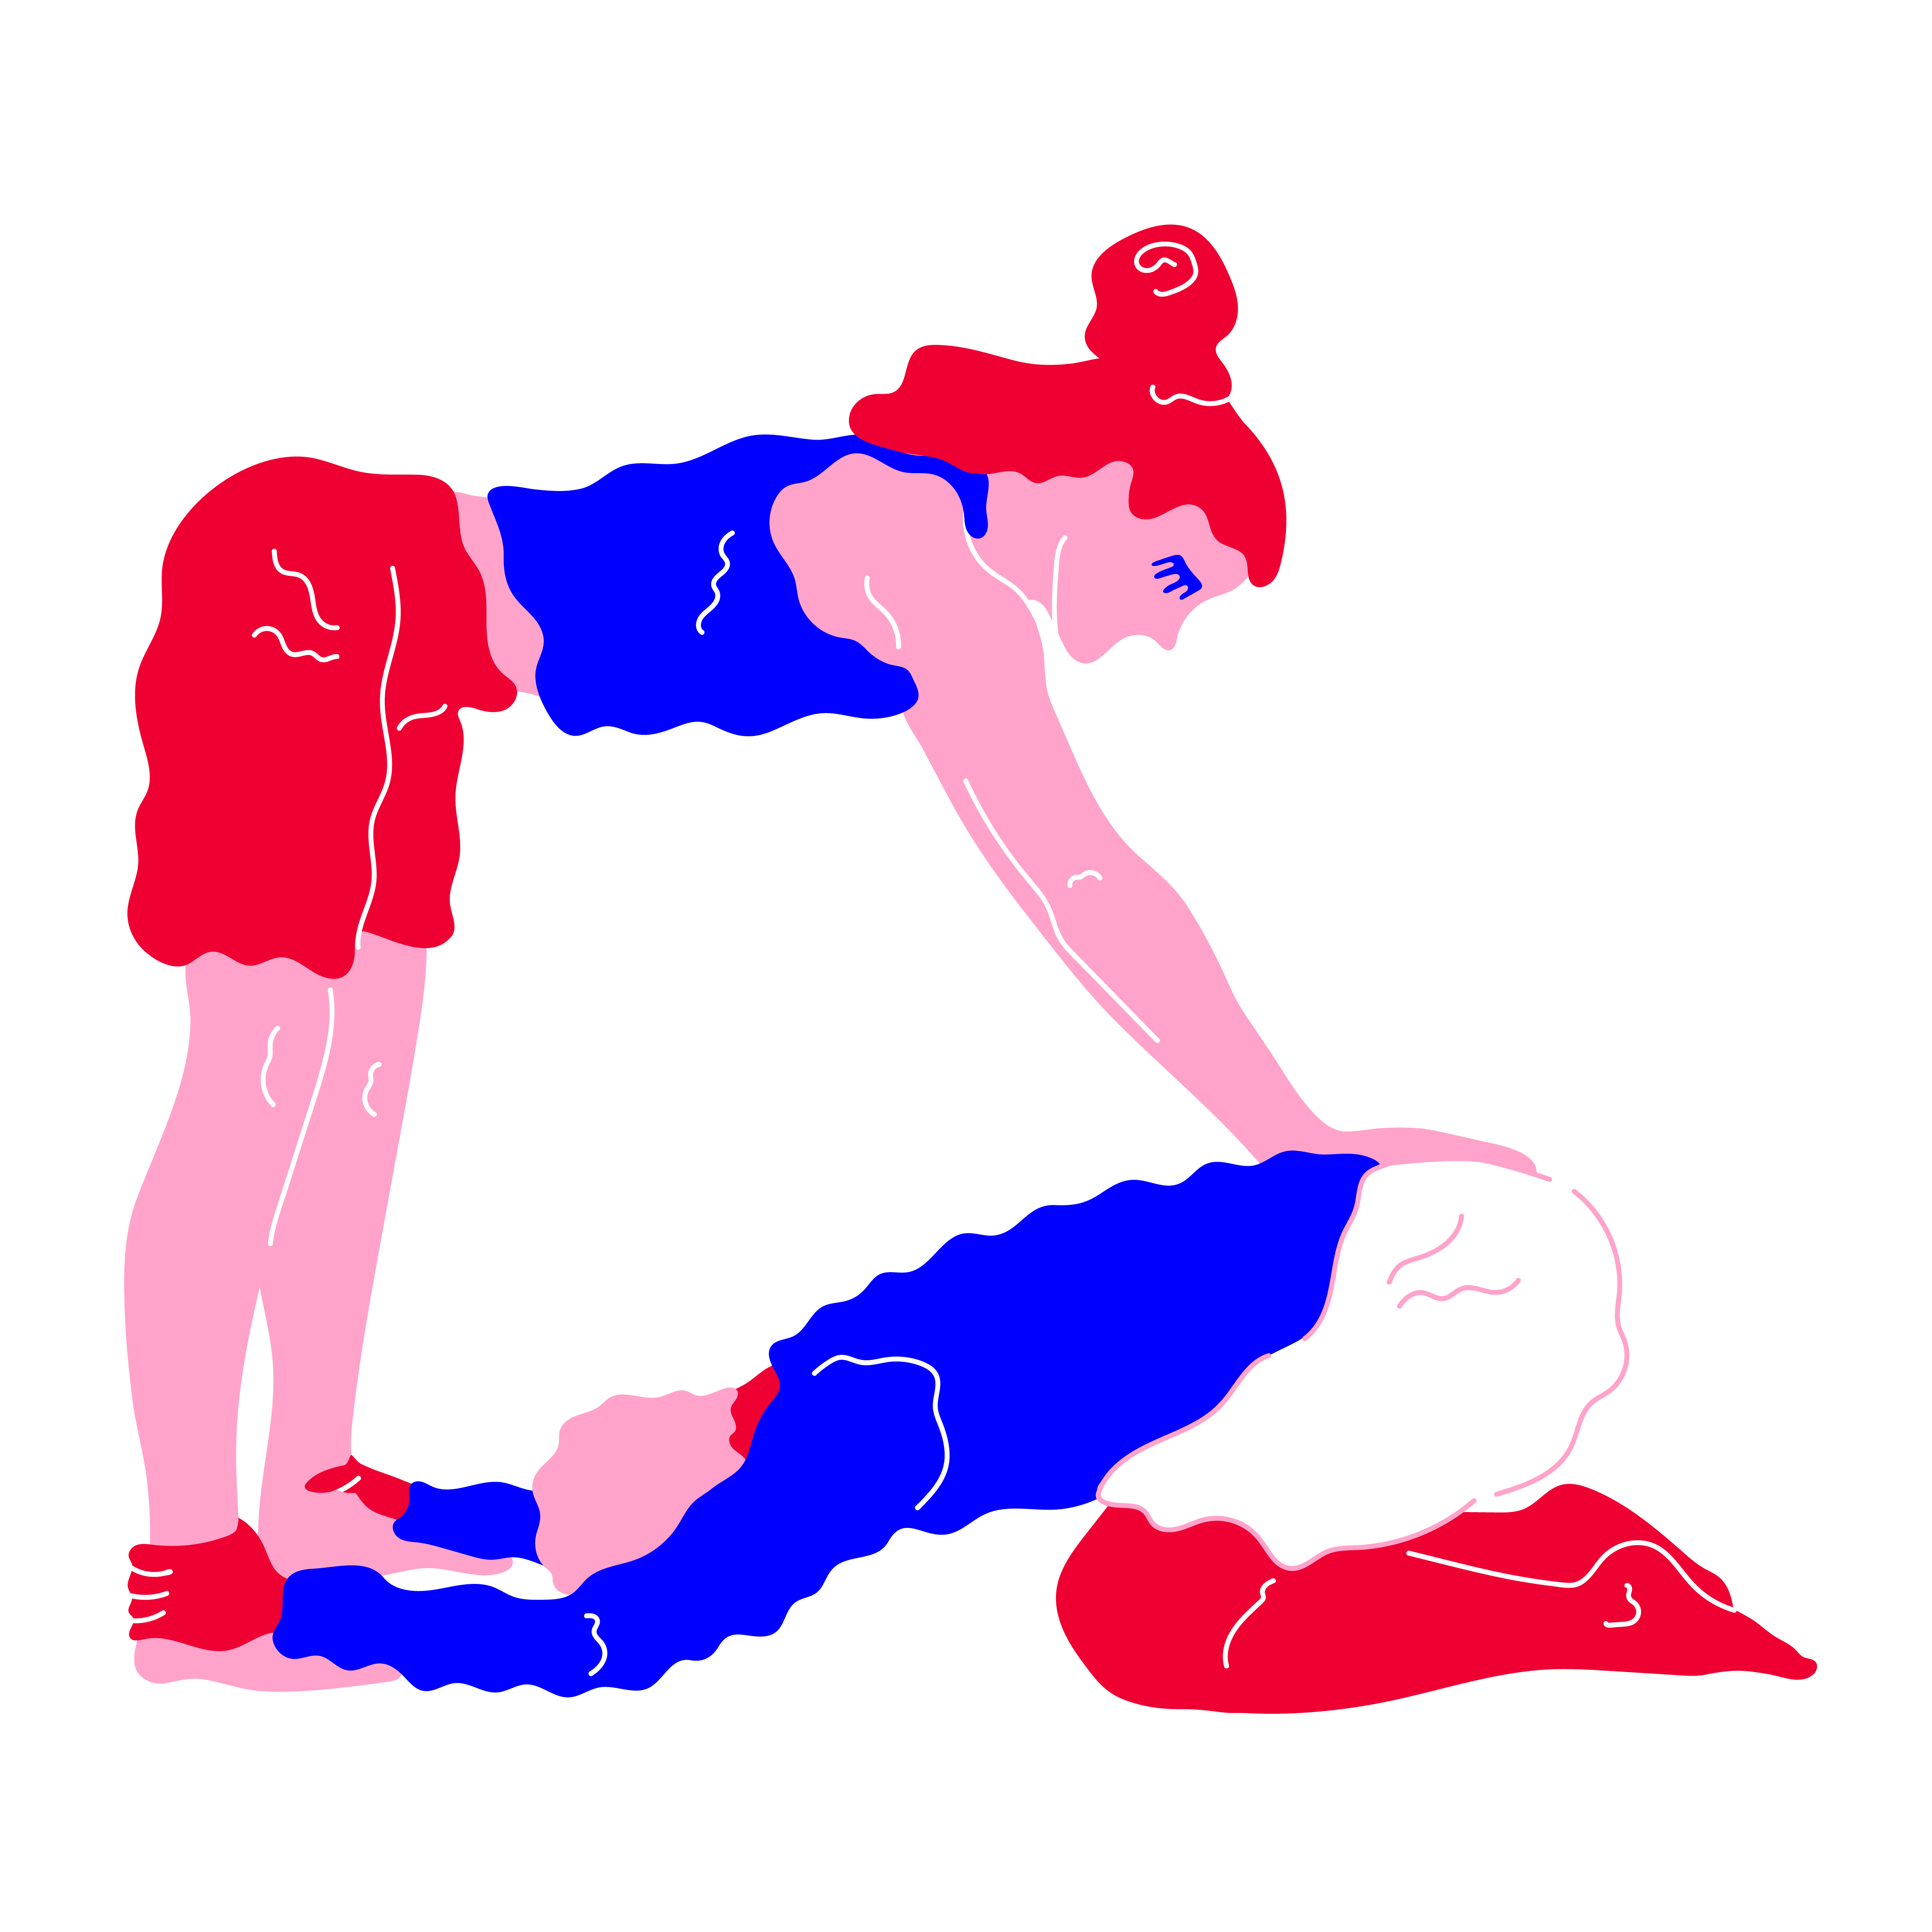 38 Couples Yoga Poses for Mind, Body, Laughter and Partnership